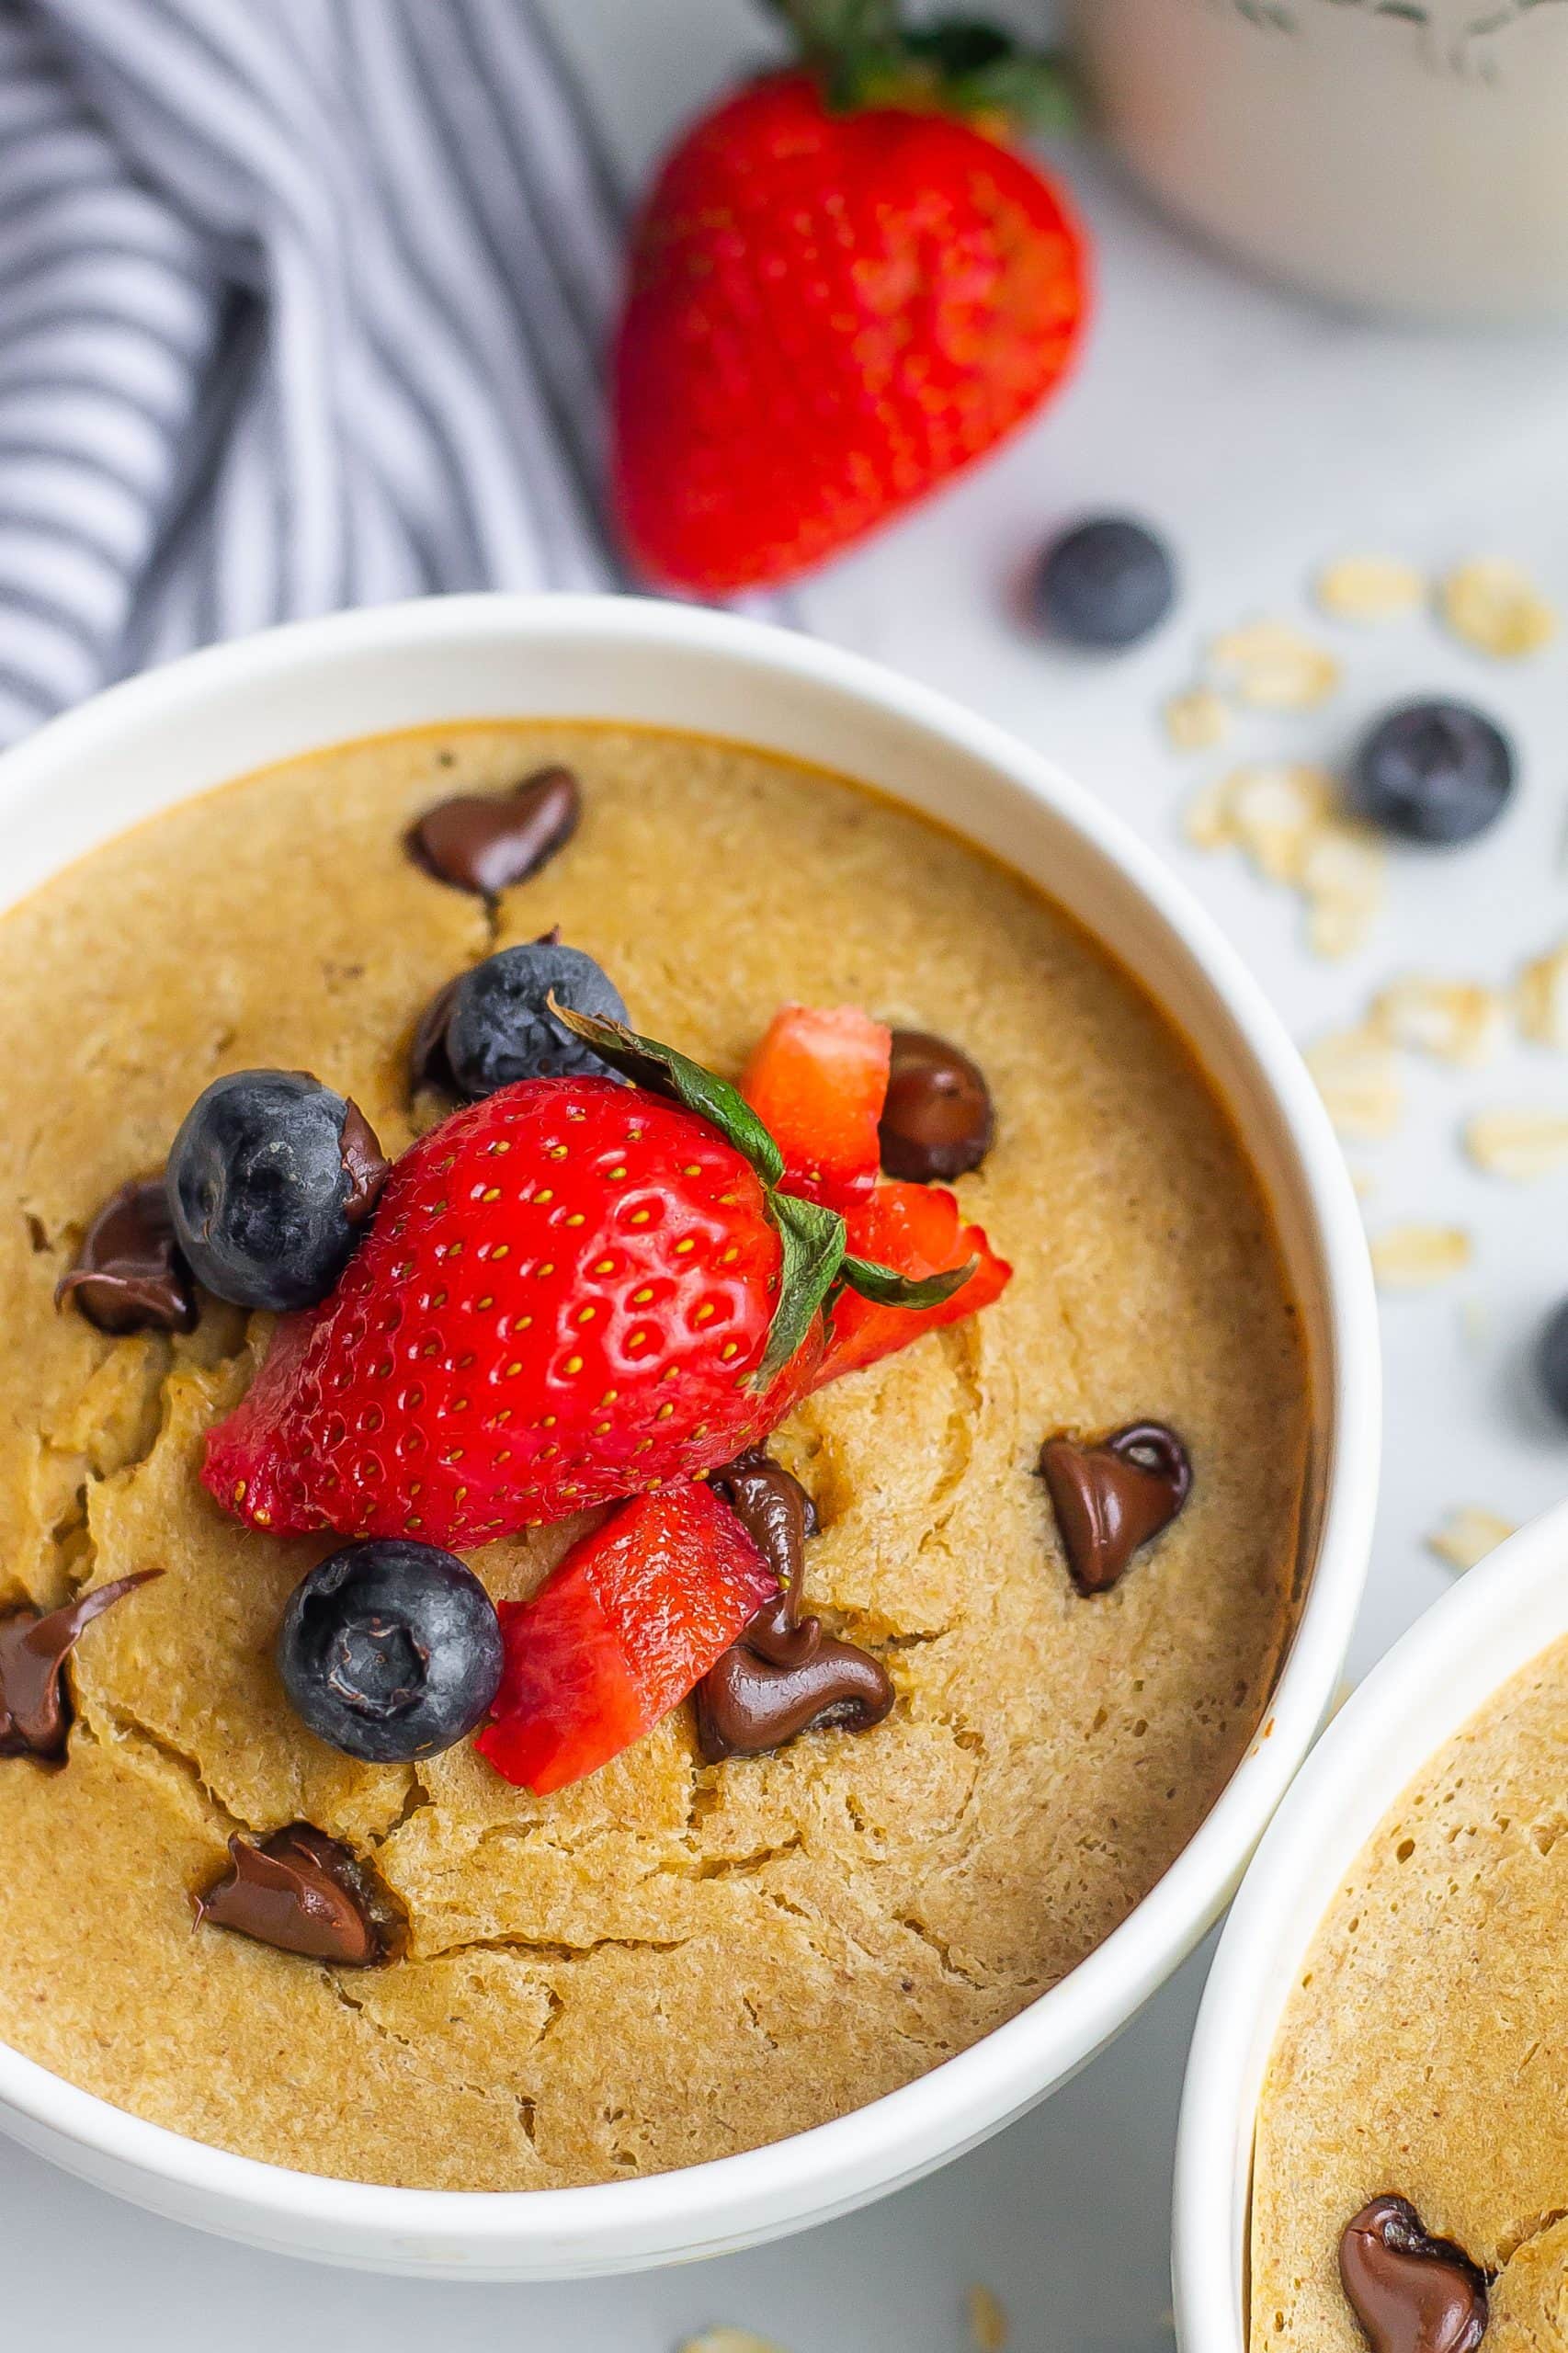 baked oats recipe with chocolate chips and berries